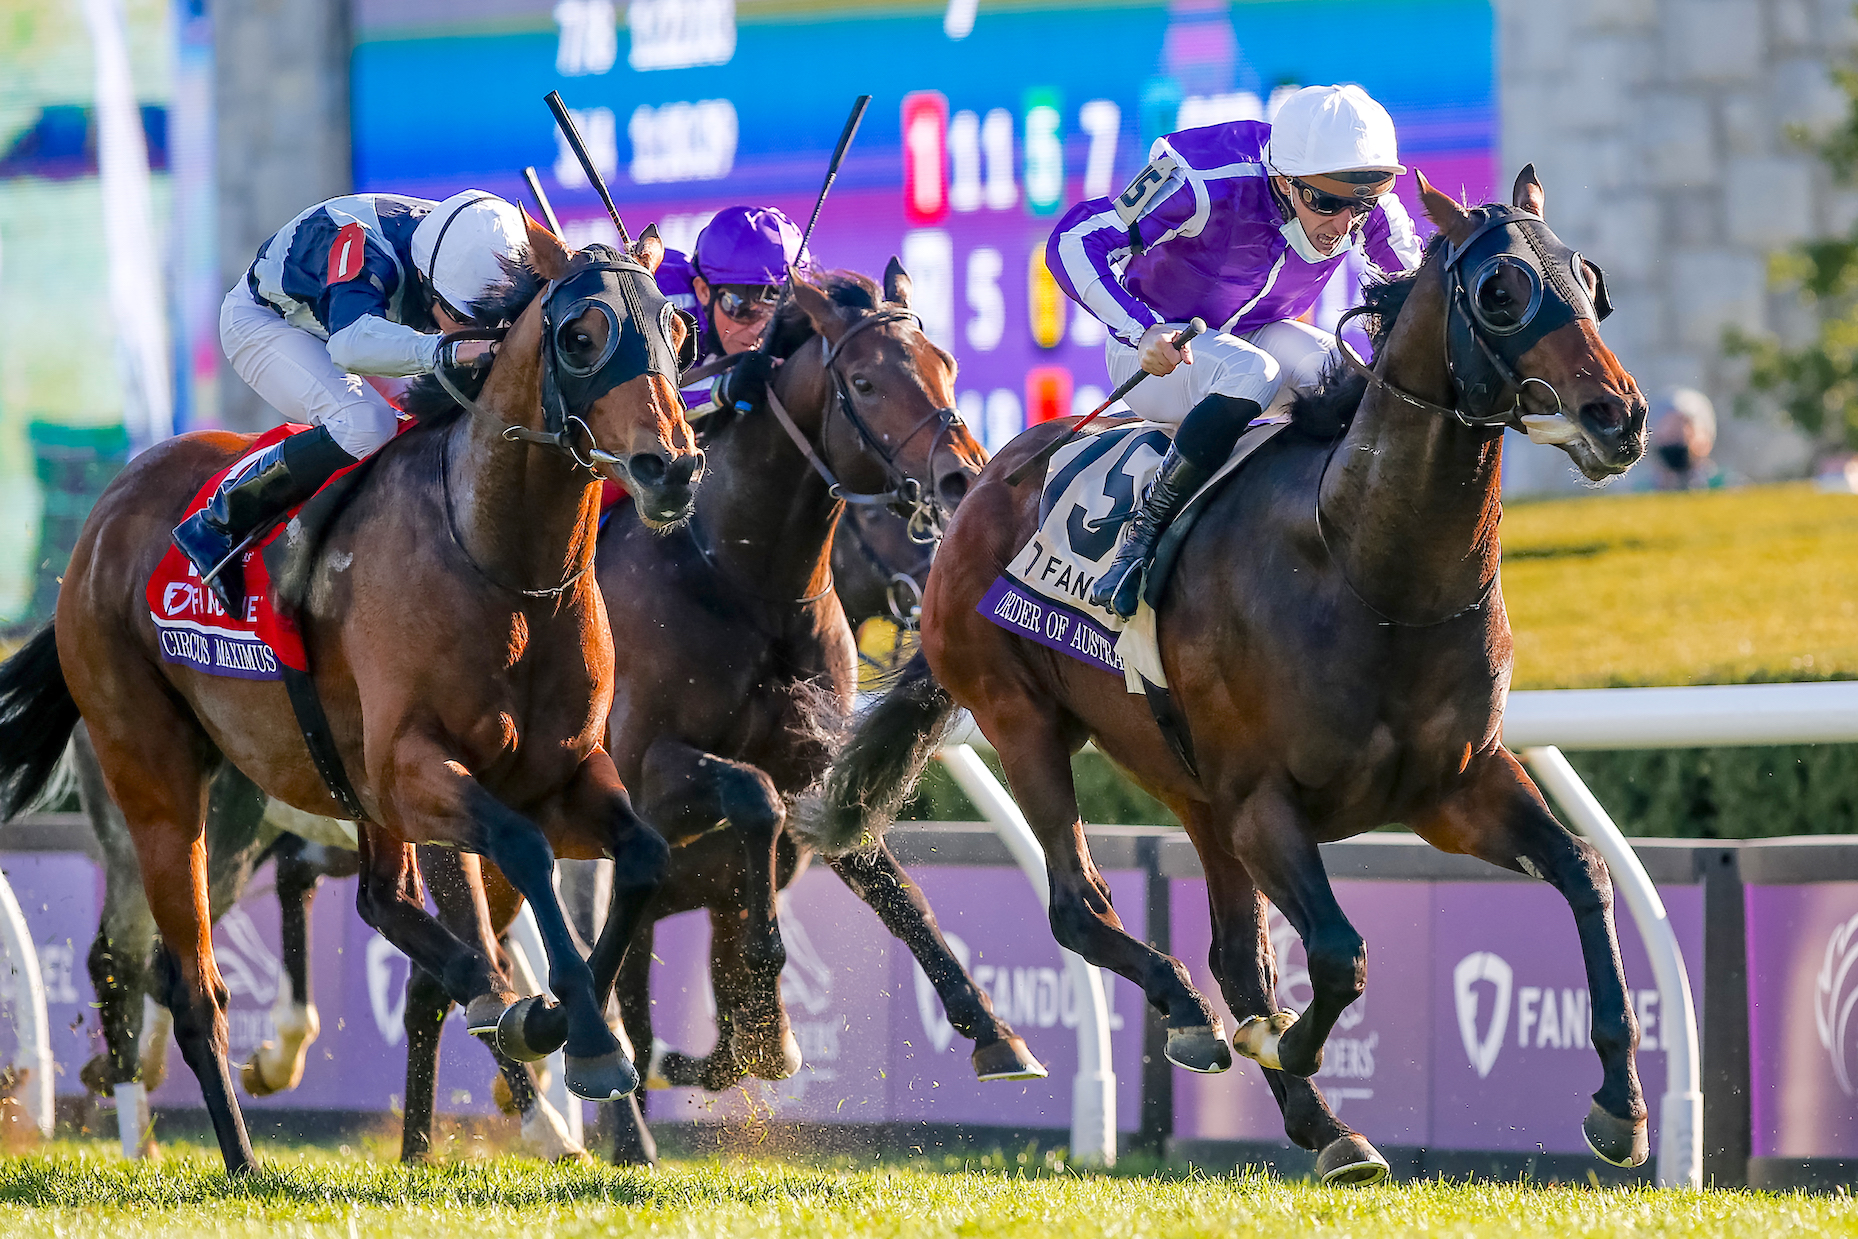 Order Of Australia winning last year’s BC Mile at Keeneland from Ballydoyle stablemates Circus Maximus (left) and Lopy Y Fernandez. The first and third were both 3-year-olds, but could hardly be considered top-class. Photo: Carolyn Simancik/Eclipsesportswire/Breeders’ Cup